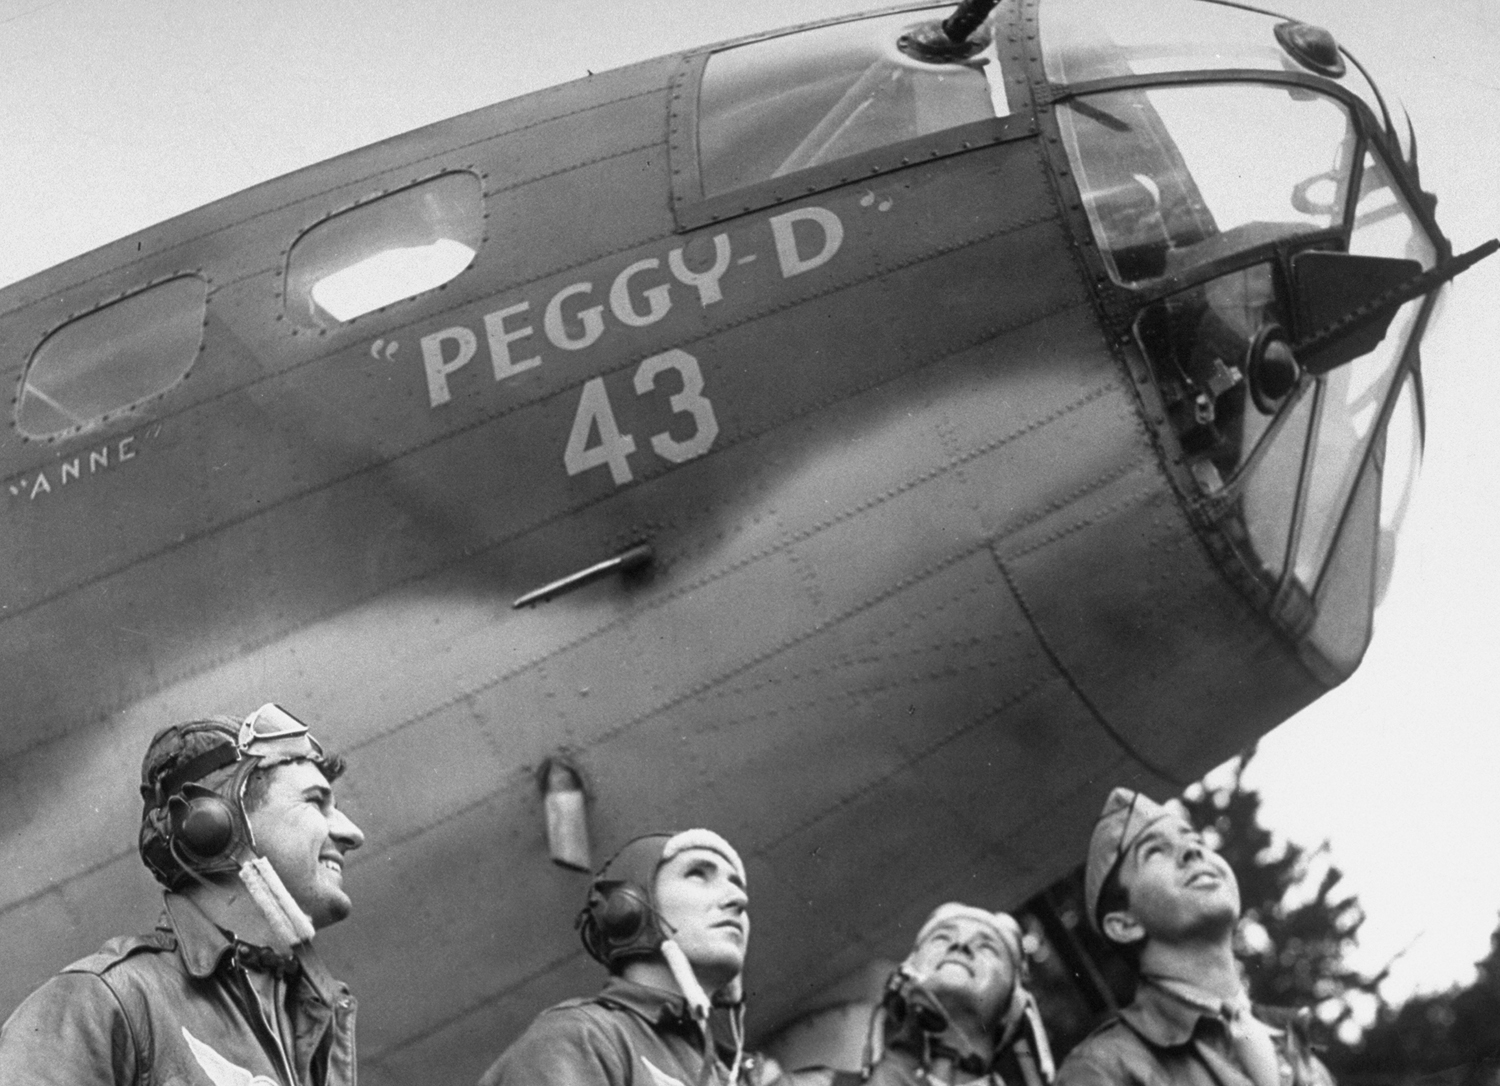 American bomber crew in England, 1942.